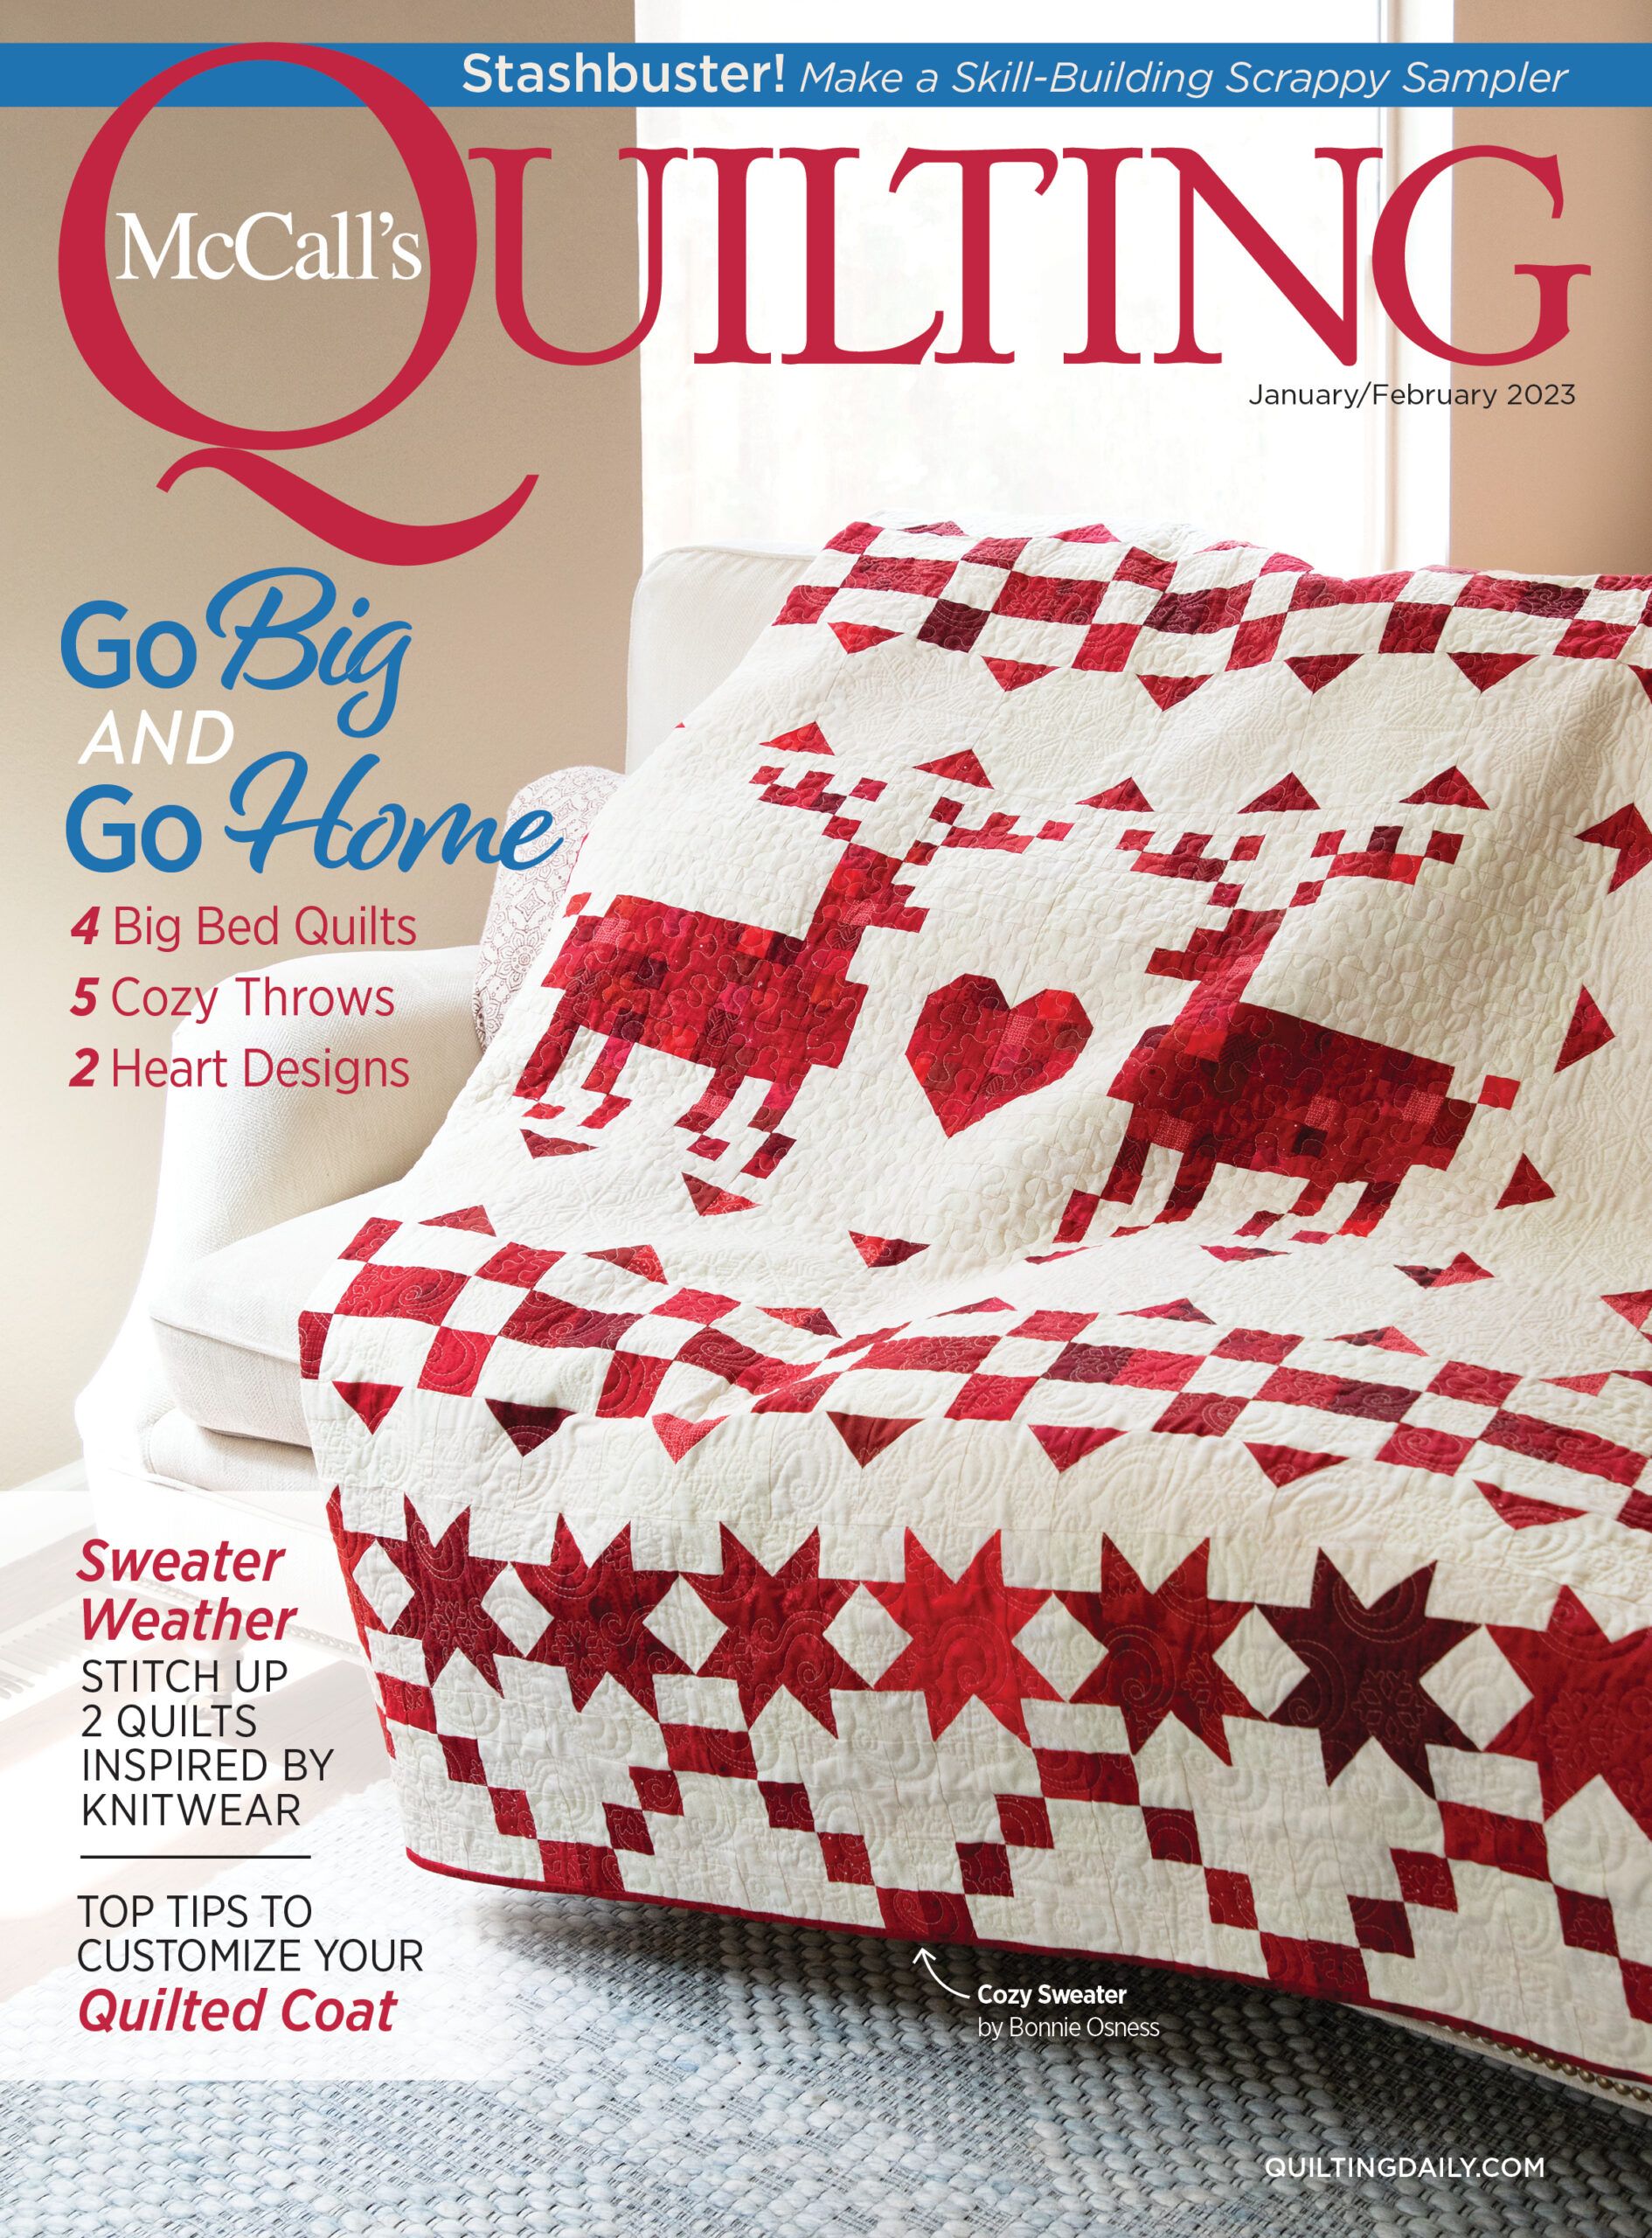 McCall's Quilting January/February 2023 Digital Edition